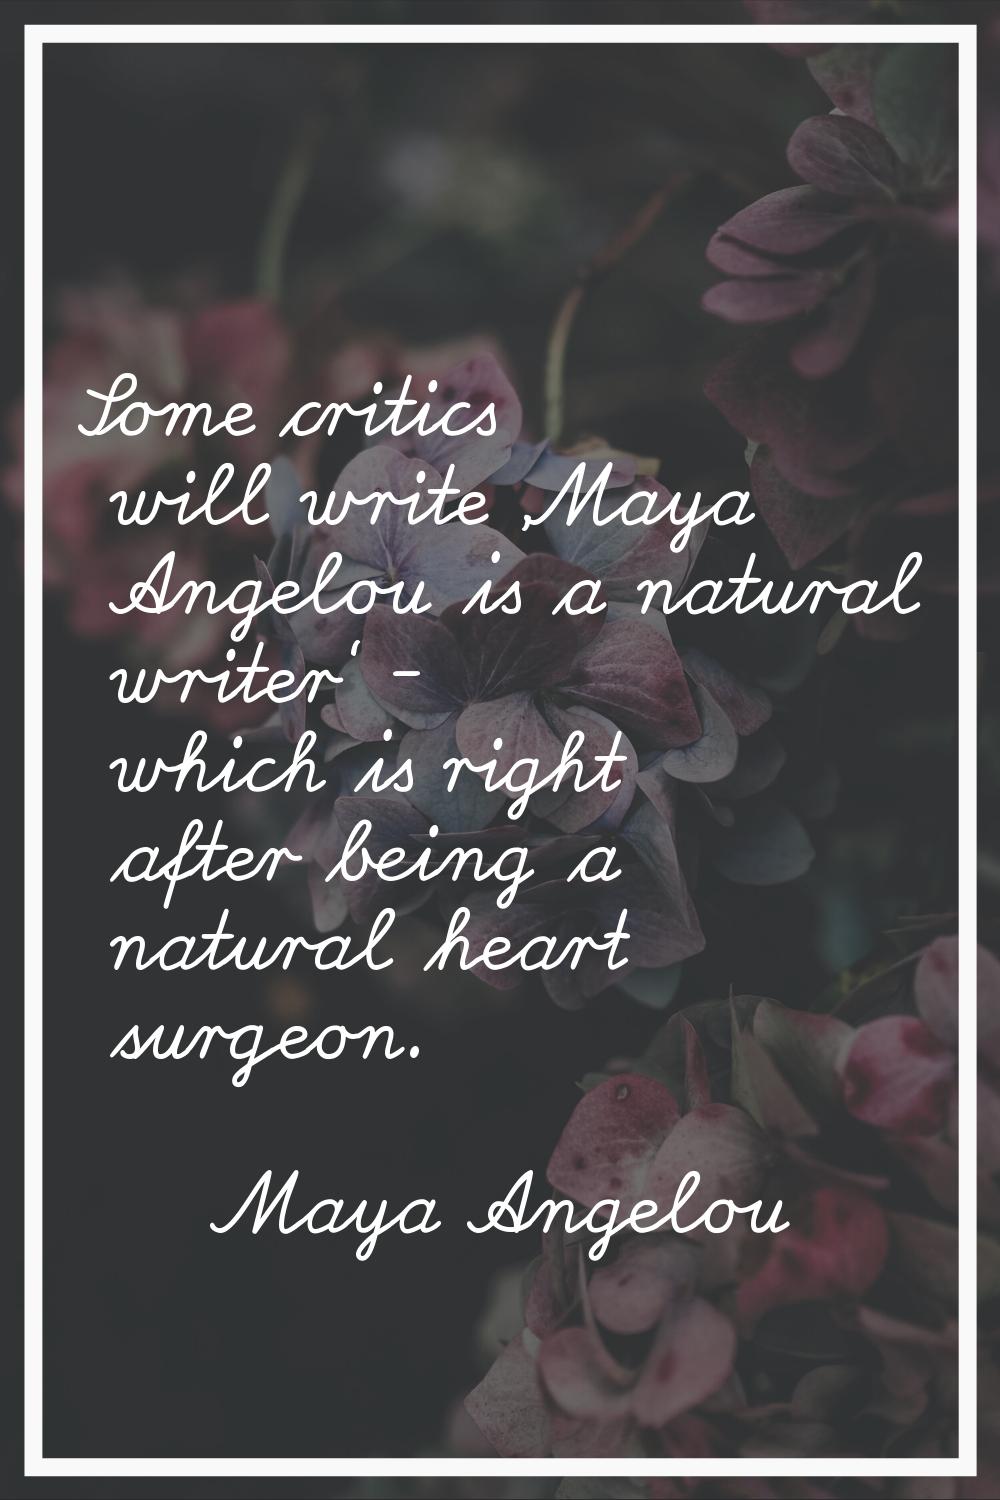 Some critics will write 'Maya Angelou is a natural writer' - which is right after being a natural h